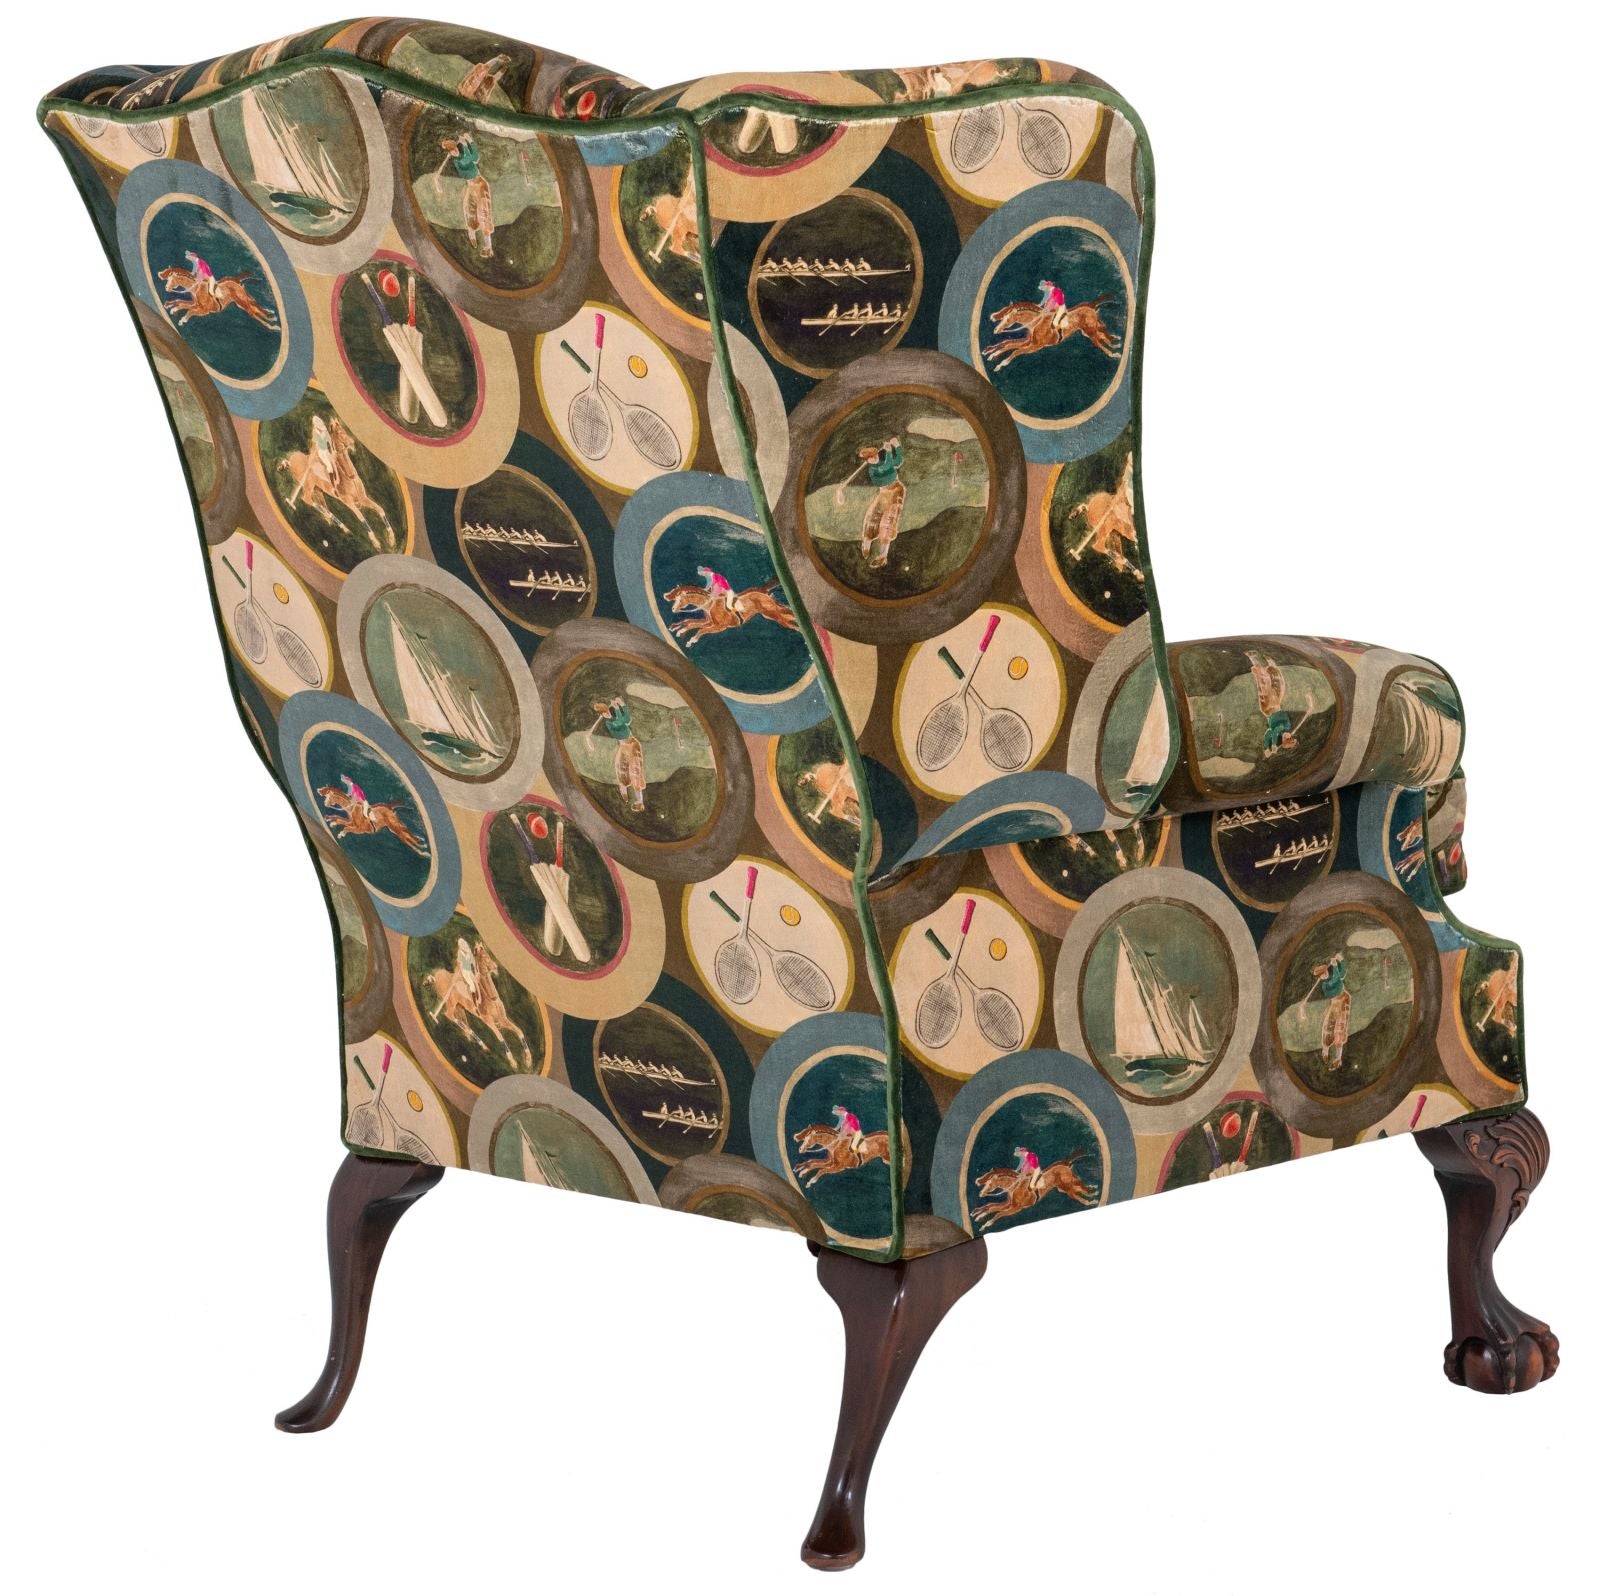 Sporting Life Mulberry Home on chair